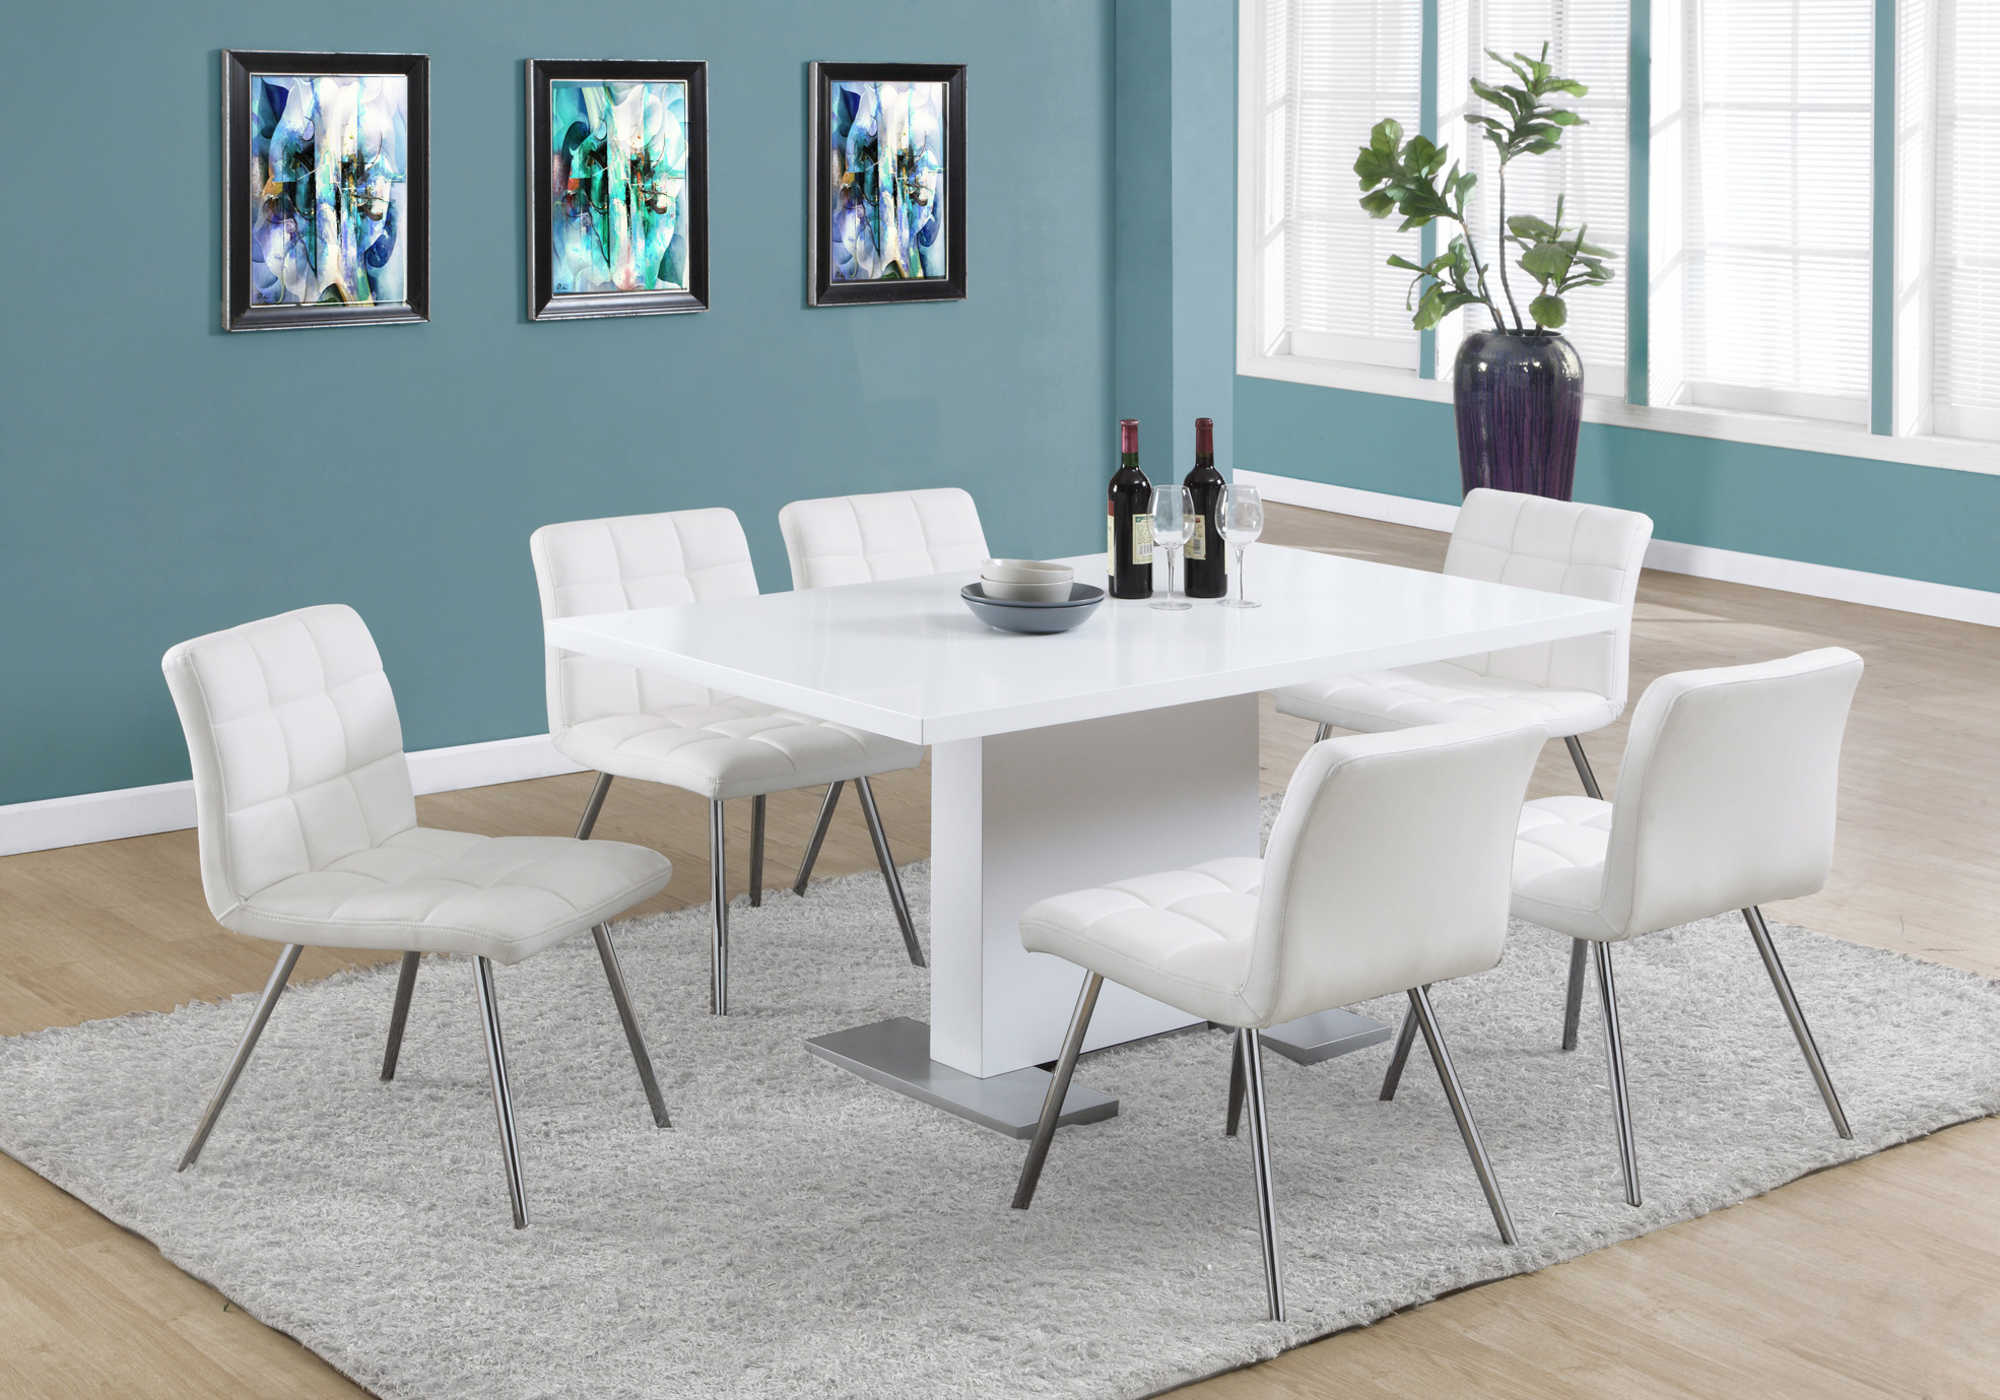 DINING TABLE - 35"X 60" / HIGH GLOSSY WHITE 